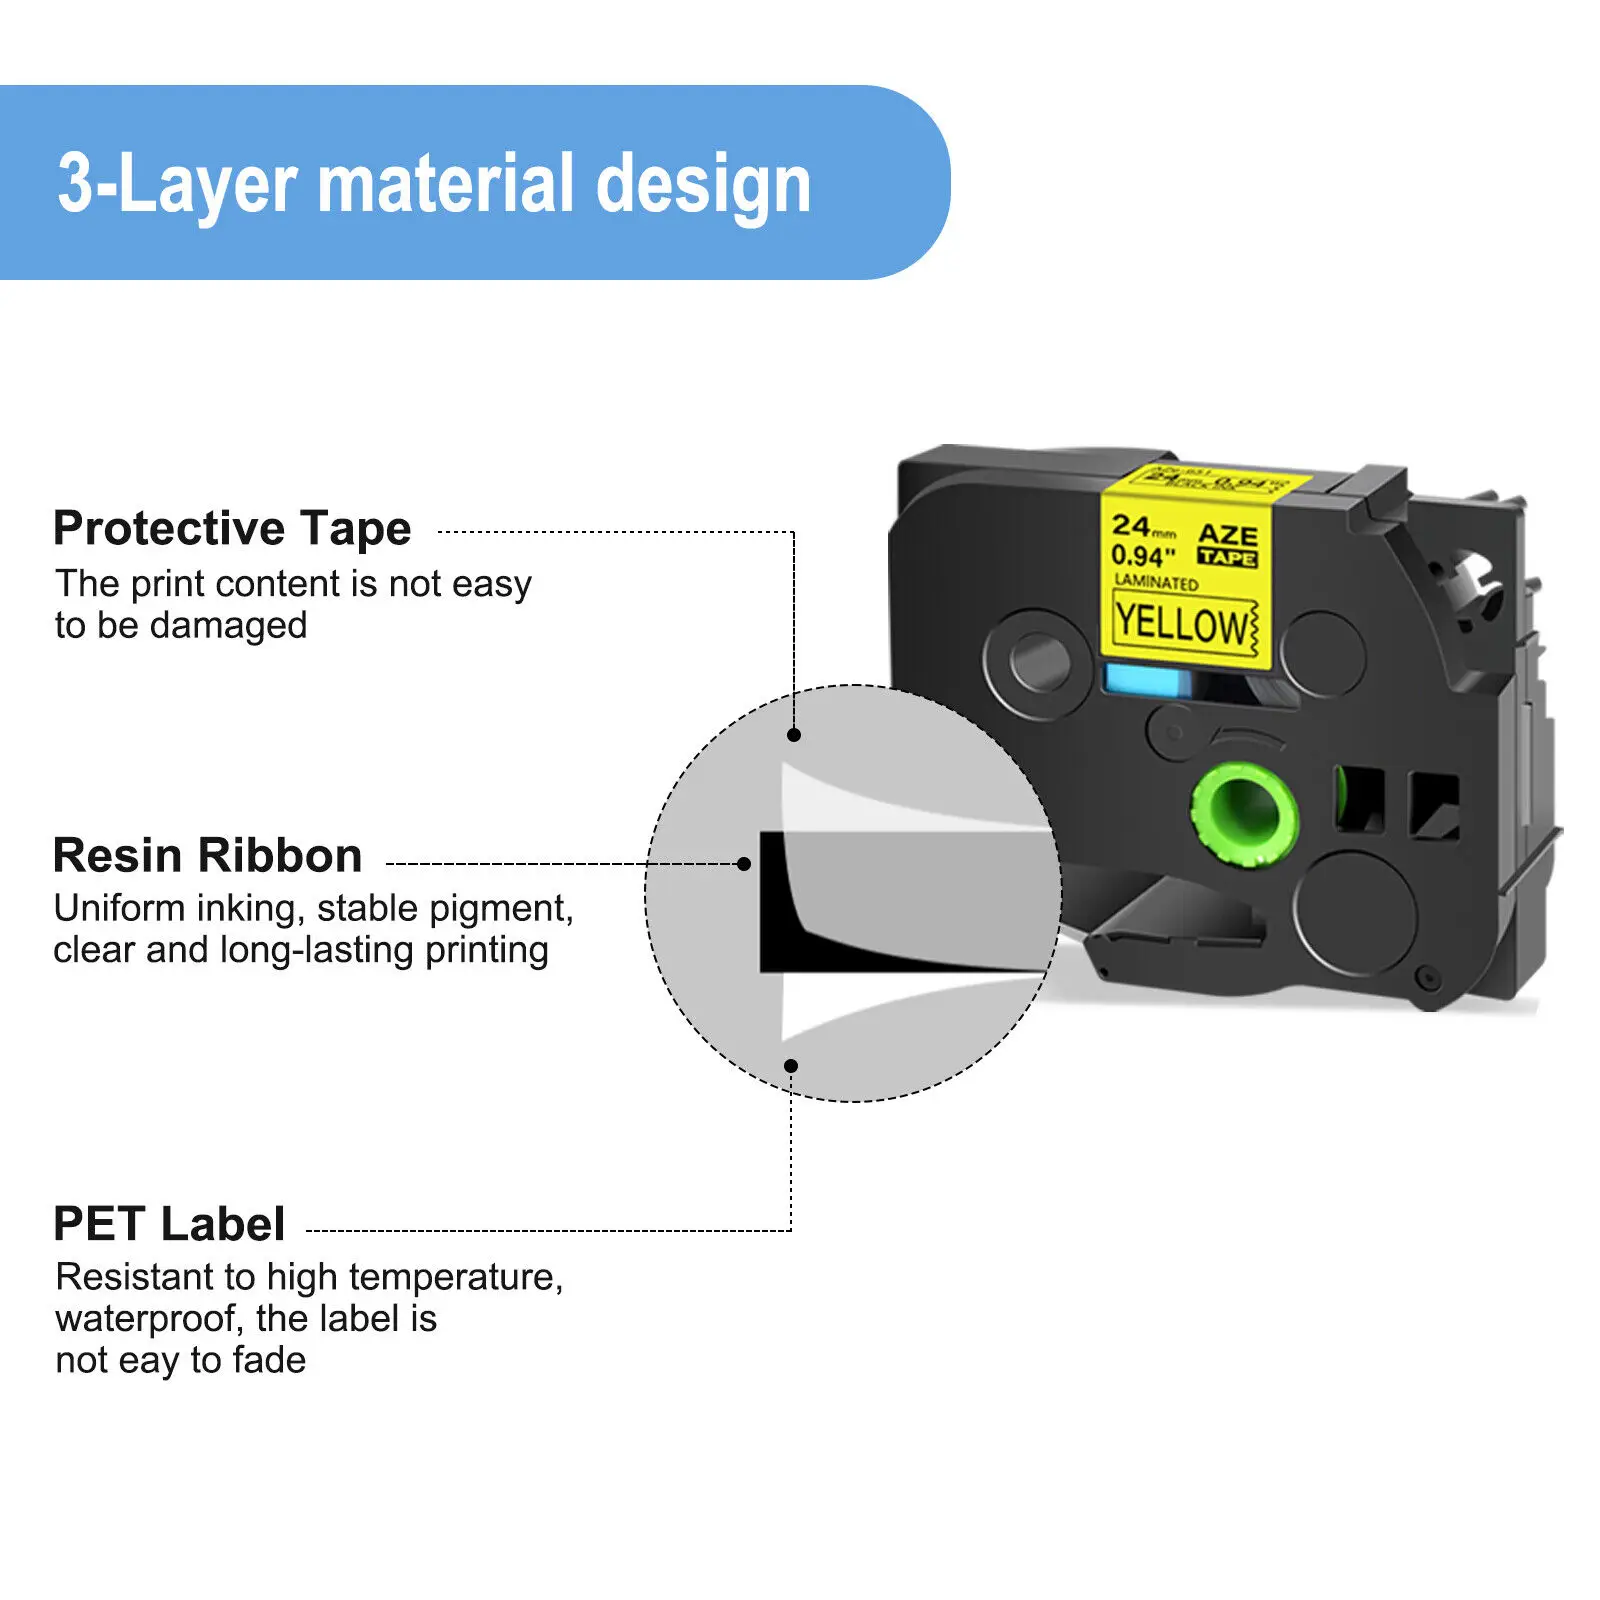 100PK Tz 24mm Label Tape Laminated Compatible Brother TZe-651 Tze 651 Black on Yellow 1 inch Tape for P-Touch D600 P710BT P700